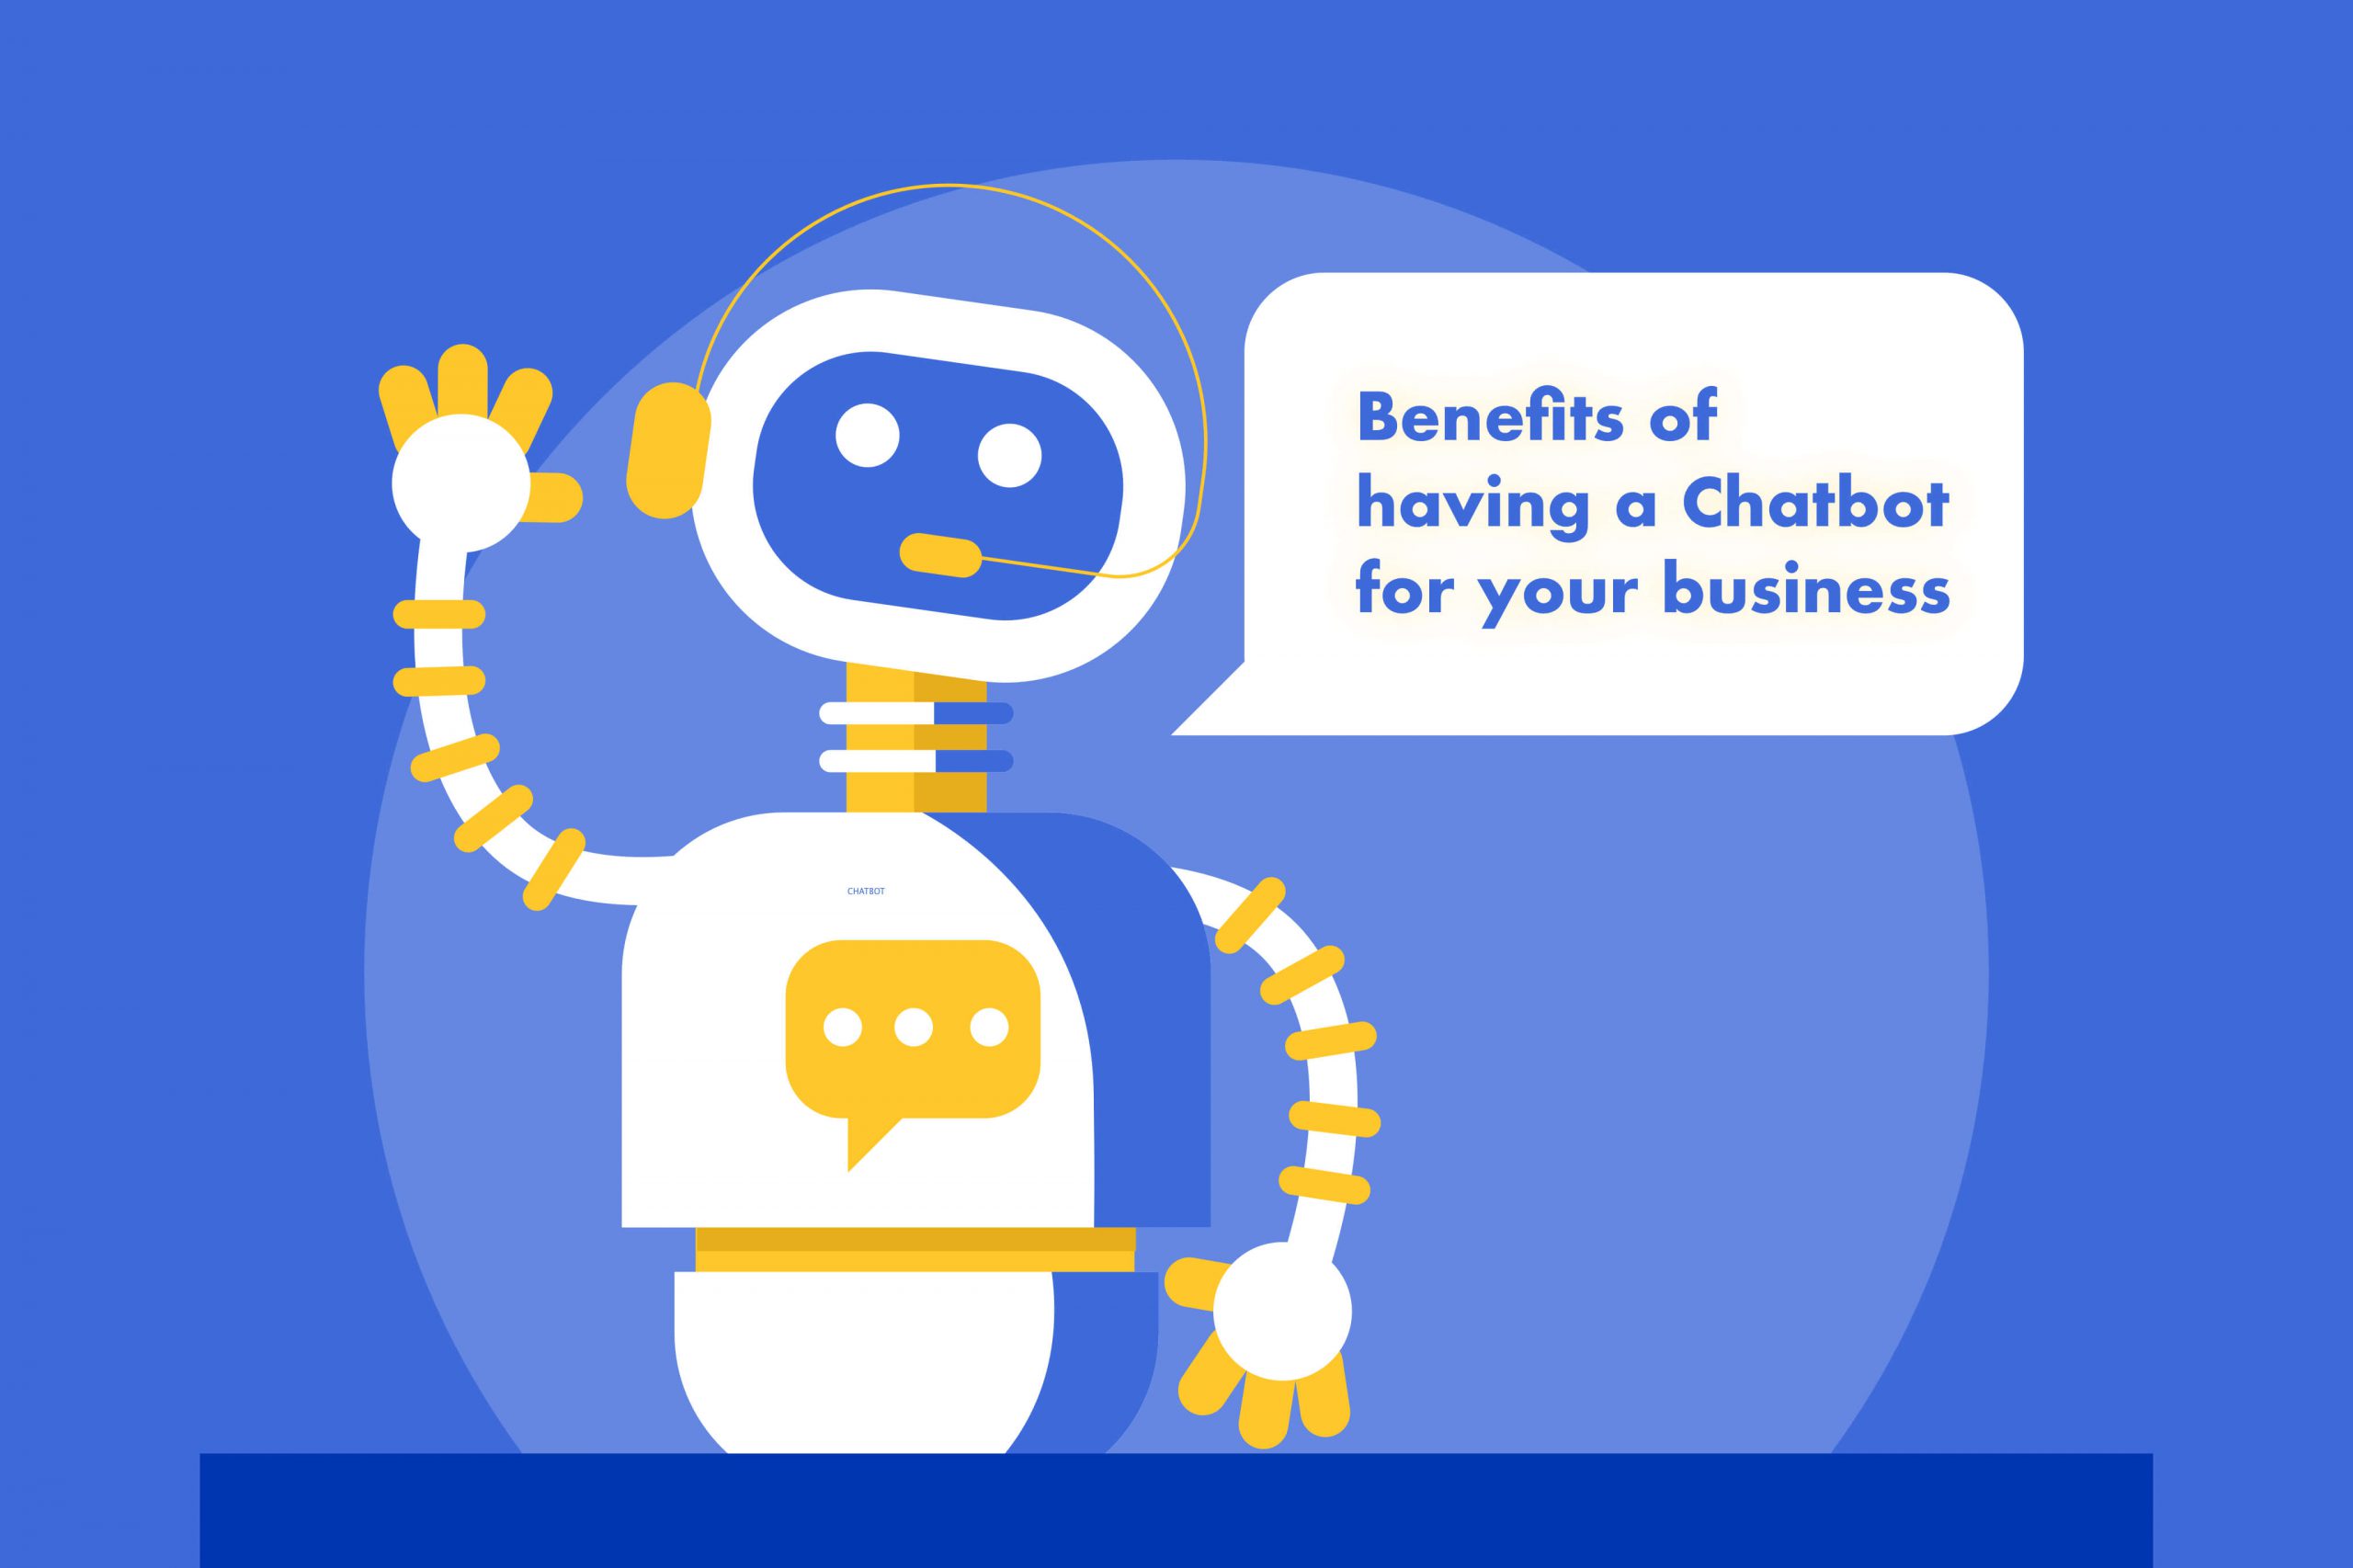 Benefits of having a Chatbot for your Business